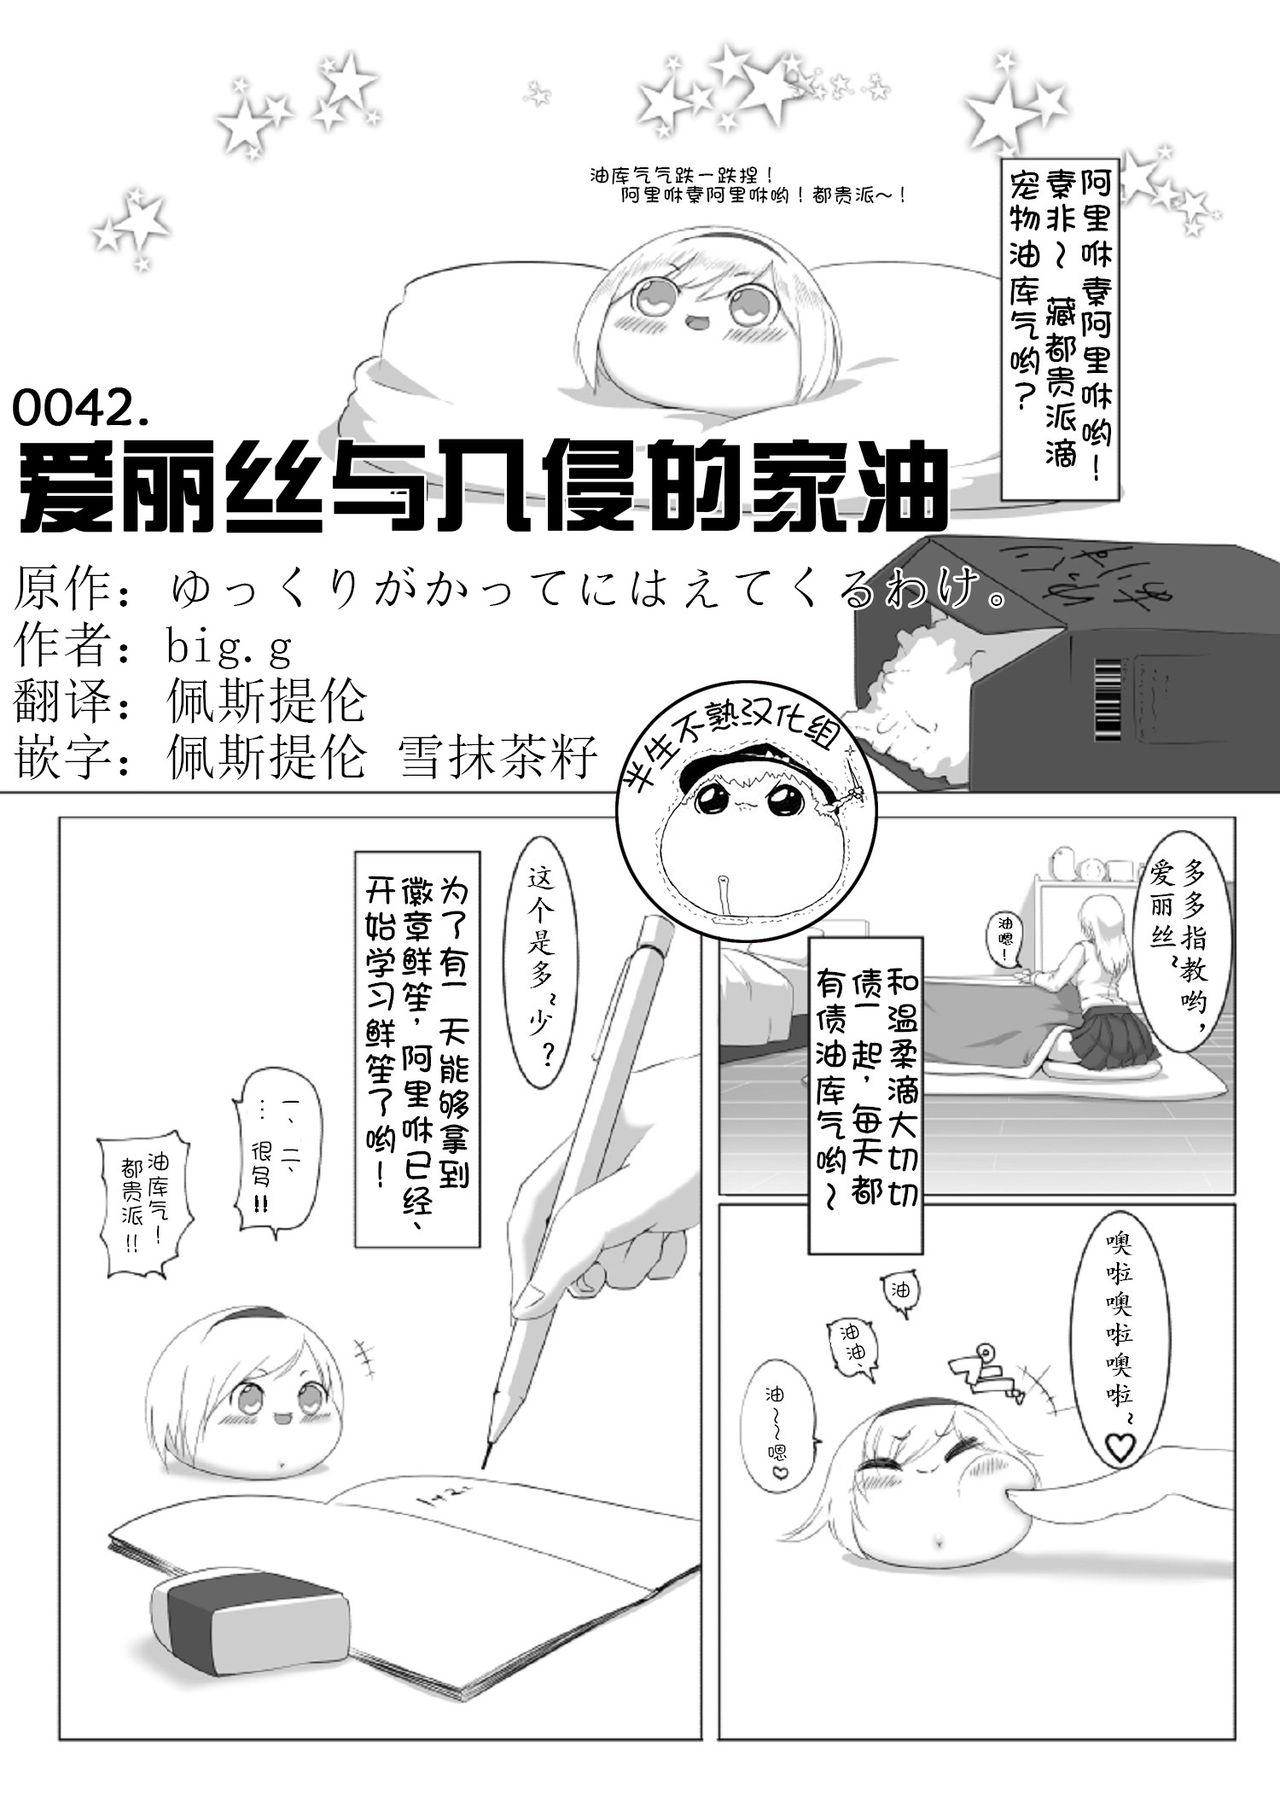 Menage ゆっくりがかってにはえてくるわけ（Chinese) - Touhou project Firsttime - Page 1